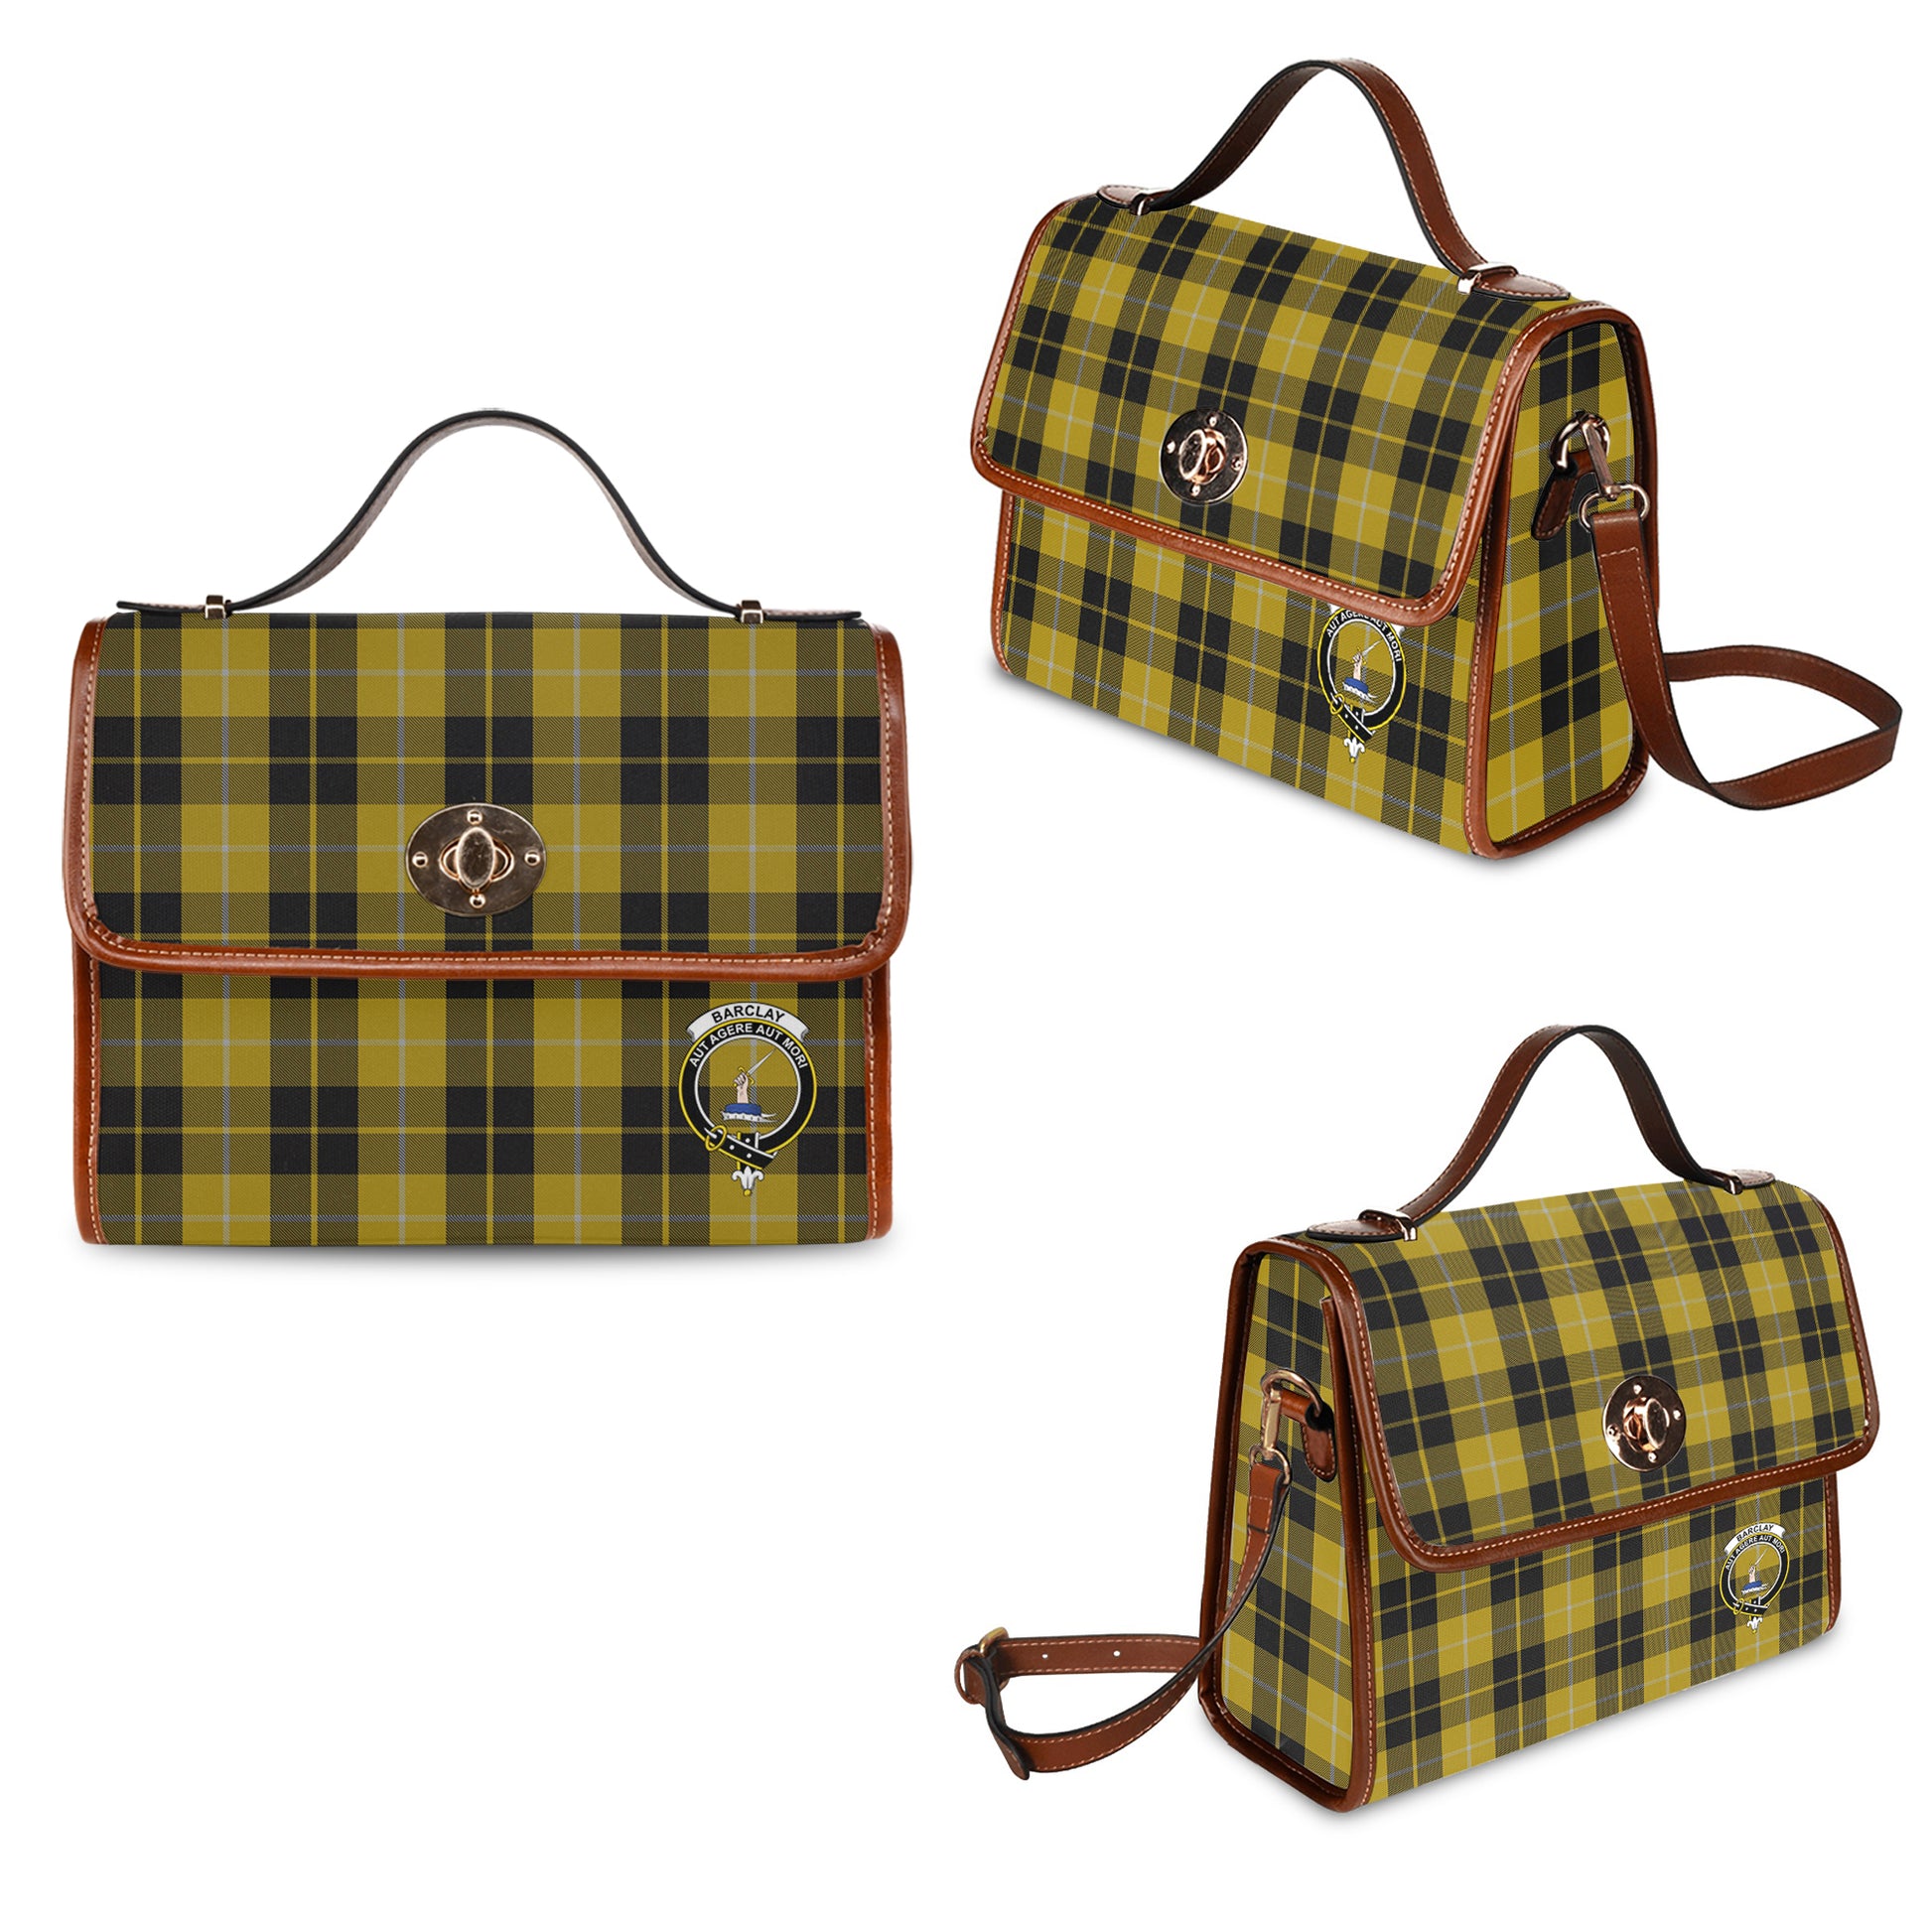 Barclay Dress Tartan Leather Strap Waterproof Canvas Bag with Family Crest One Size 34cm * 42cm (13.4" x 16.5") - Tartanvibesclothing